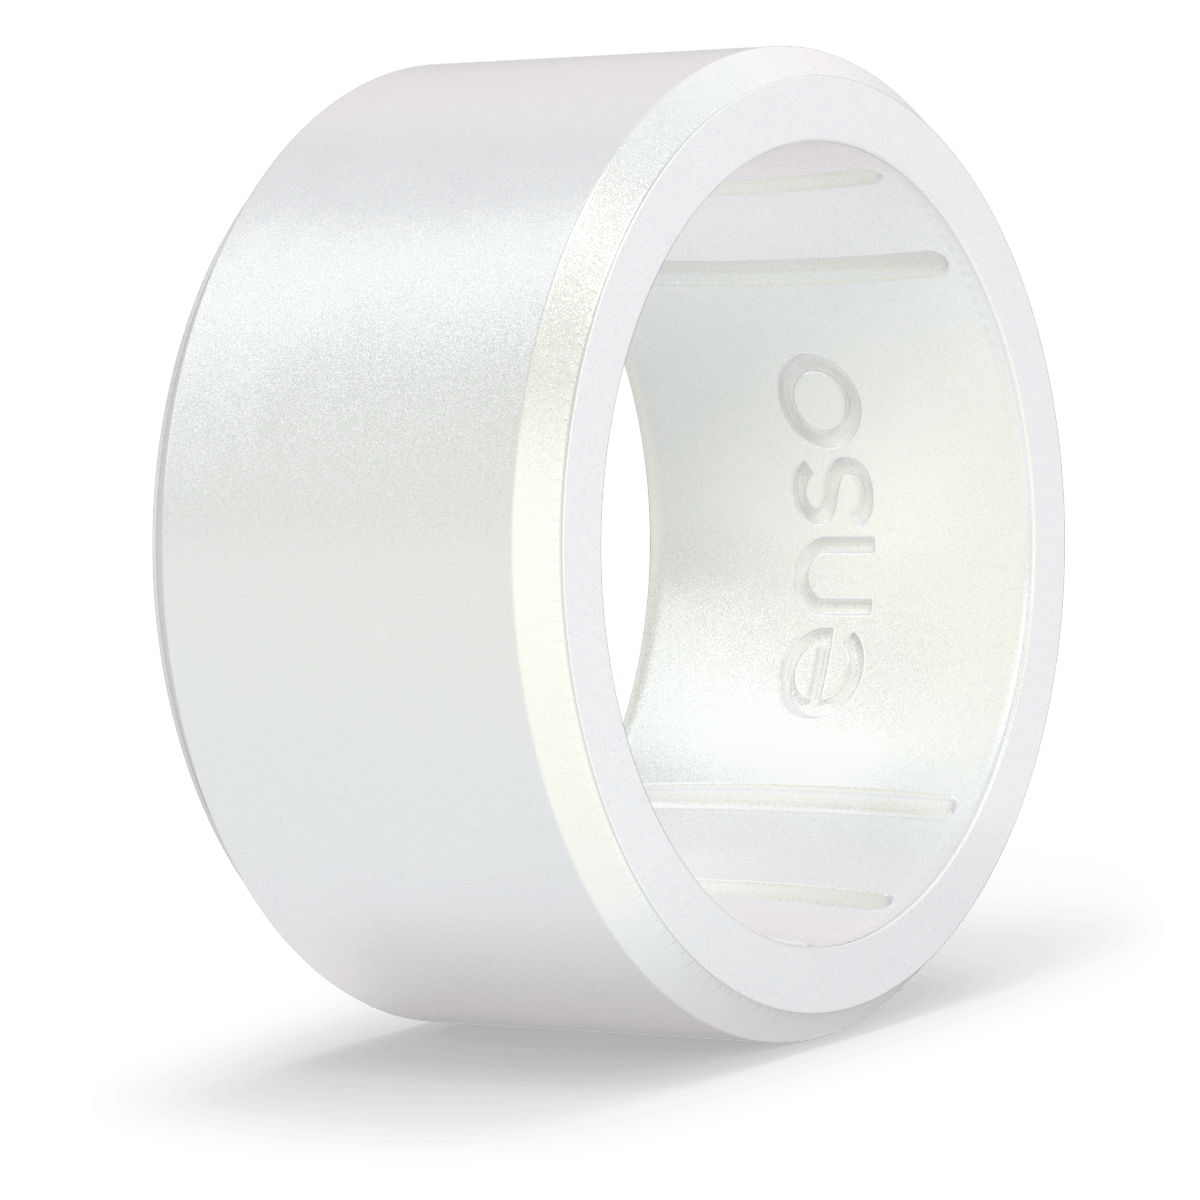 Enso Rings enso rings marquee silicone rings, wide ring collection